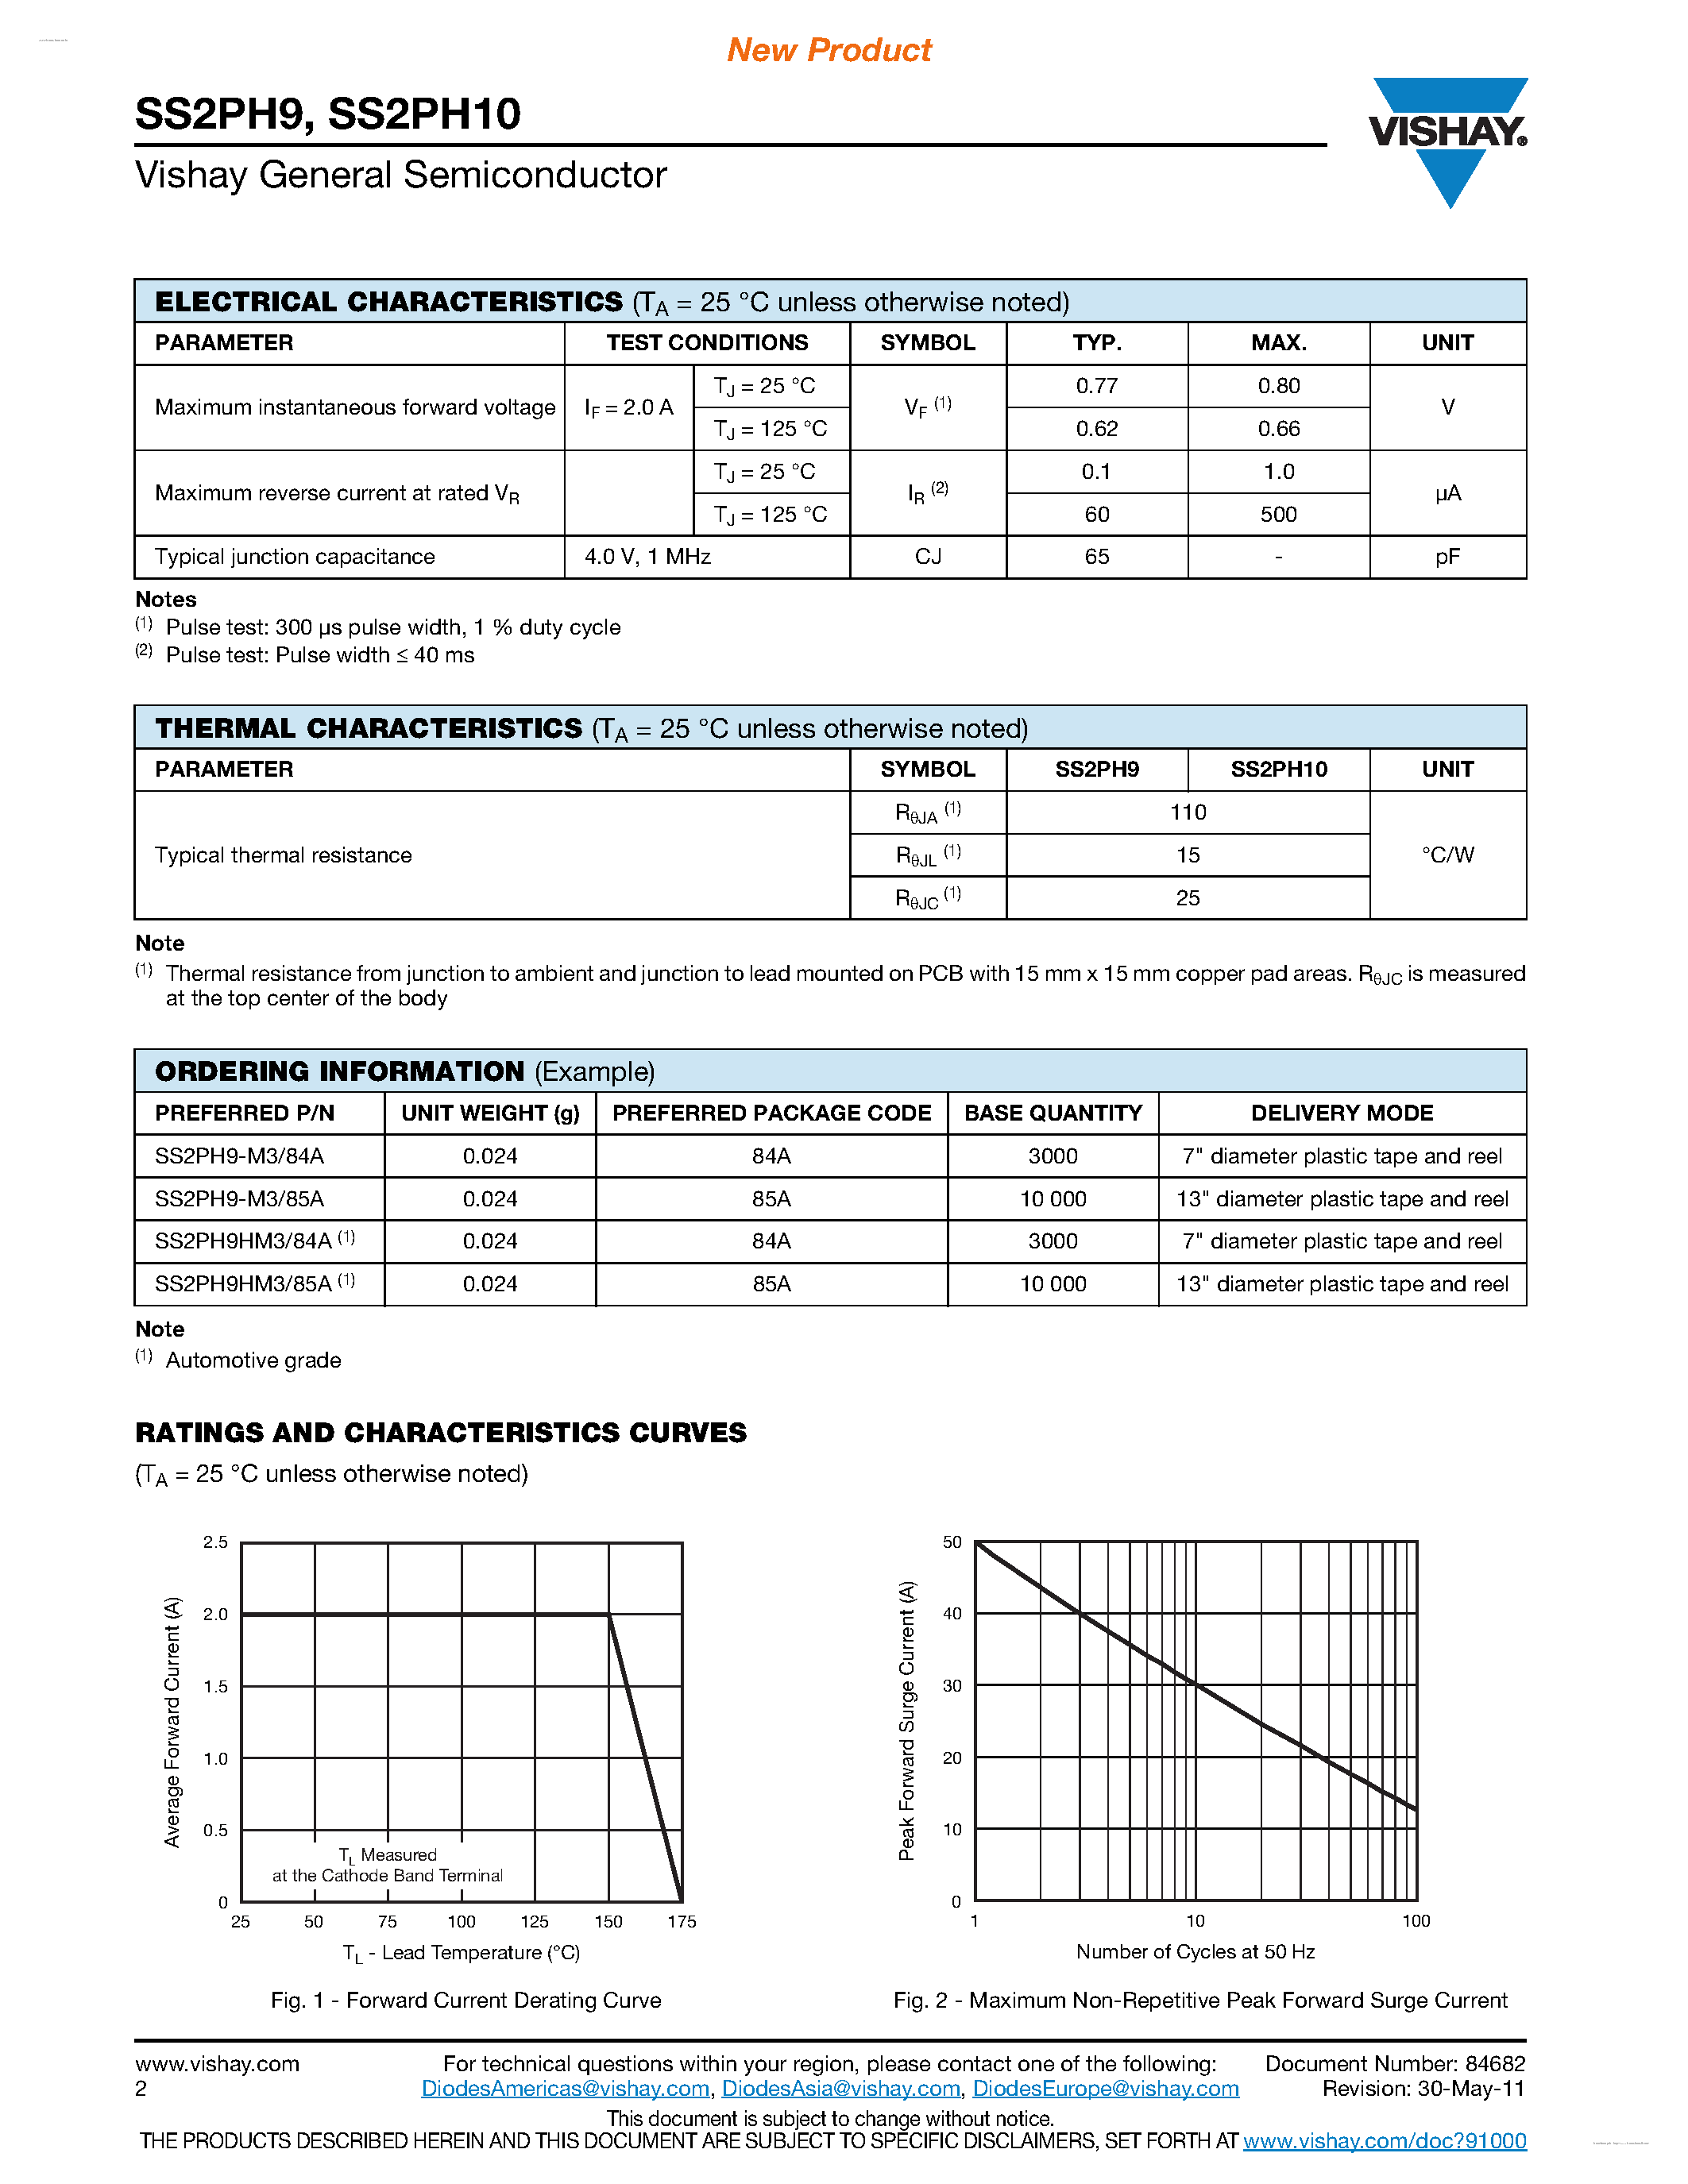 Datasheet SS2PH10 - (SS2PH9 / SS2PH10) High Voltage Surface Mount Schottky Barrier Rectifier page 2